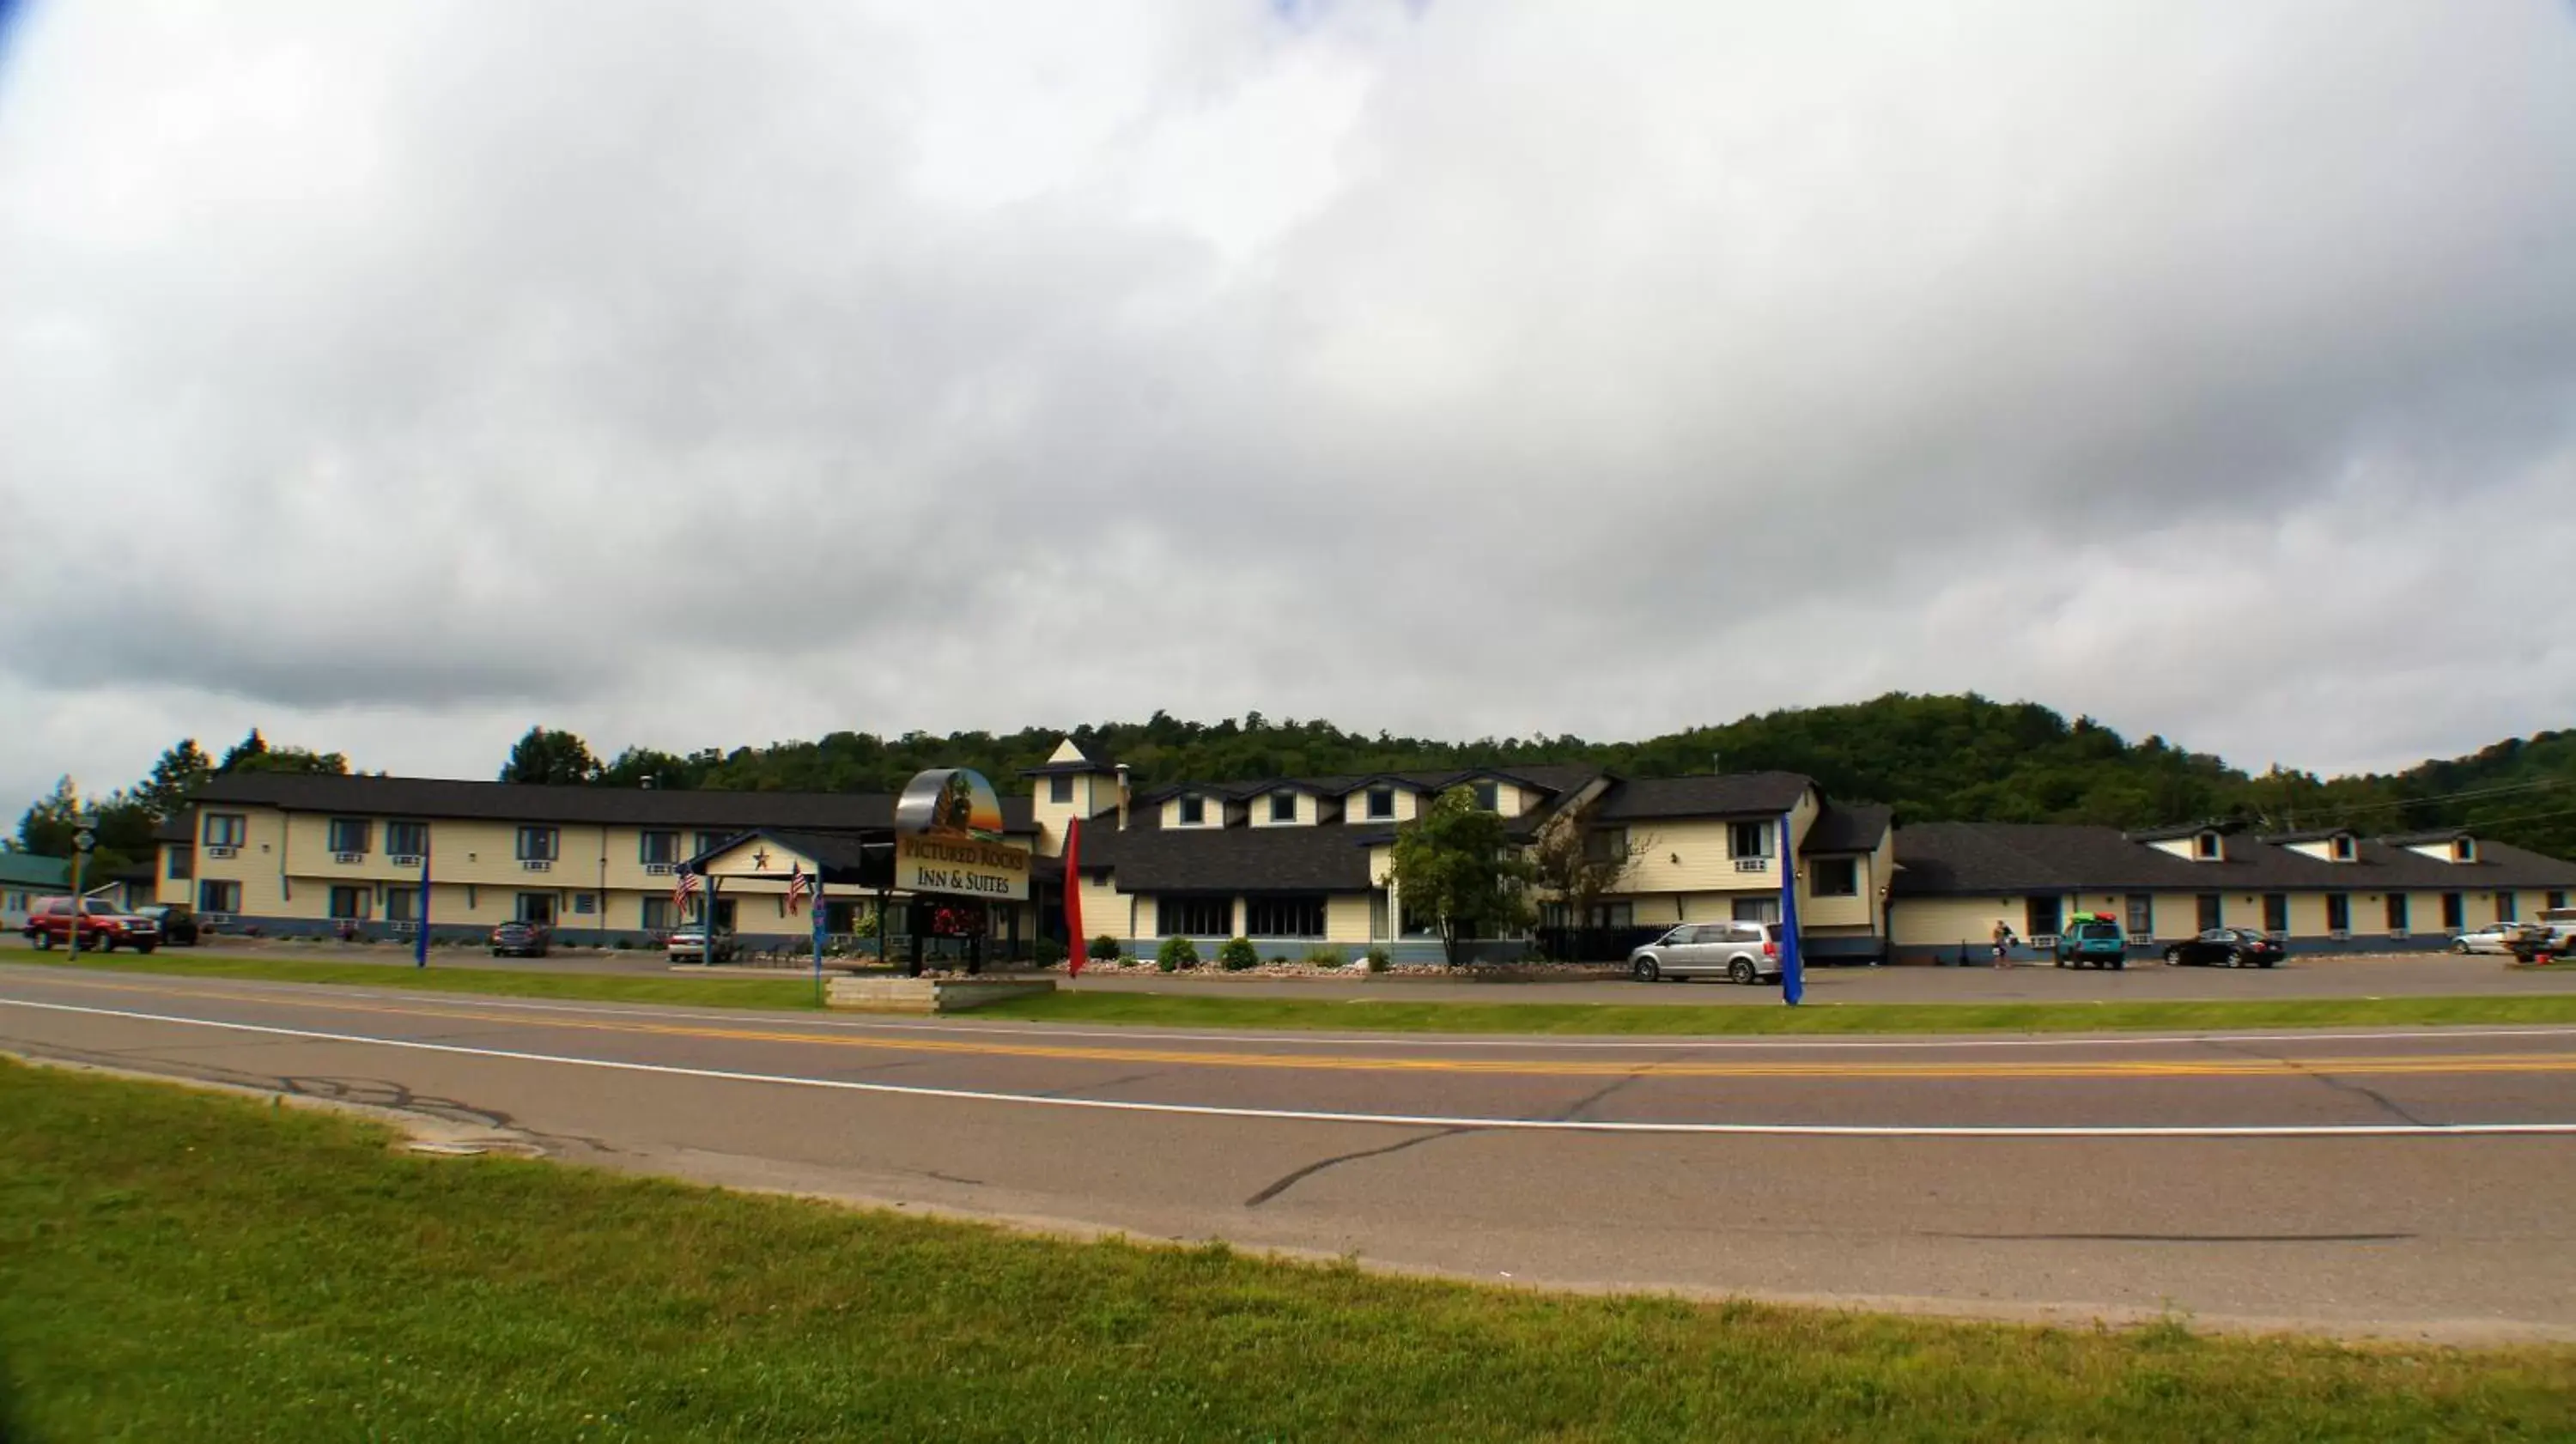 Property Building in Pictured Rocks Inn and Suites